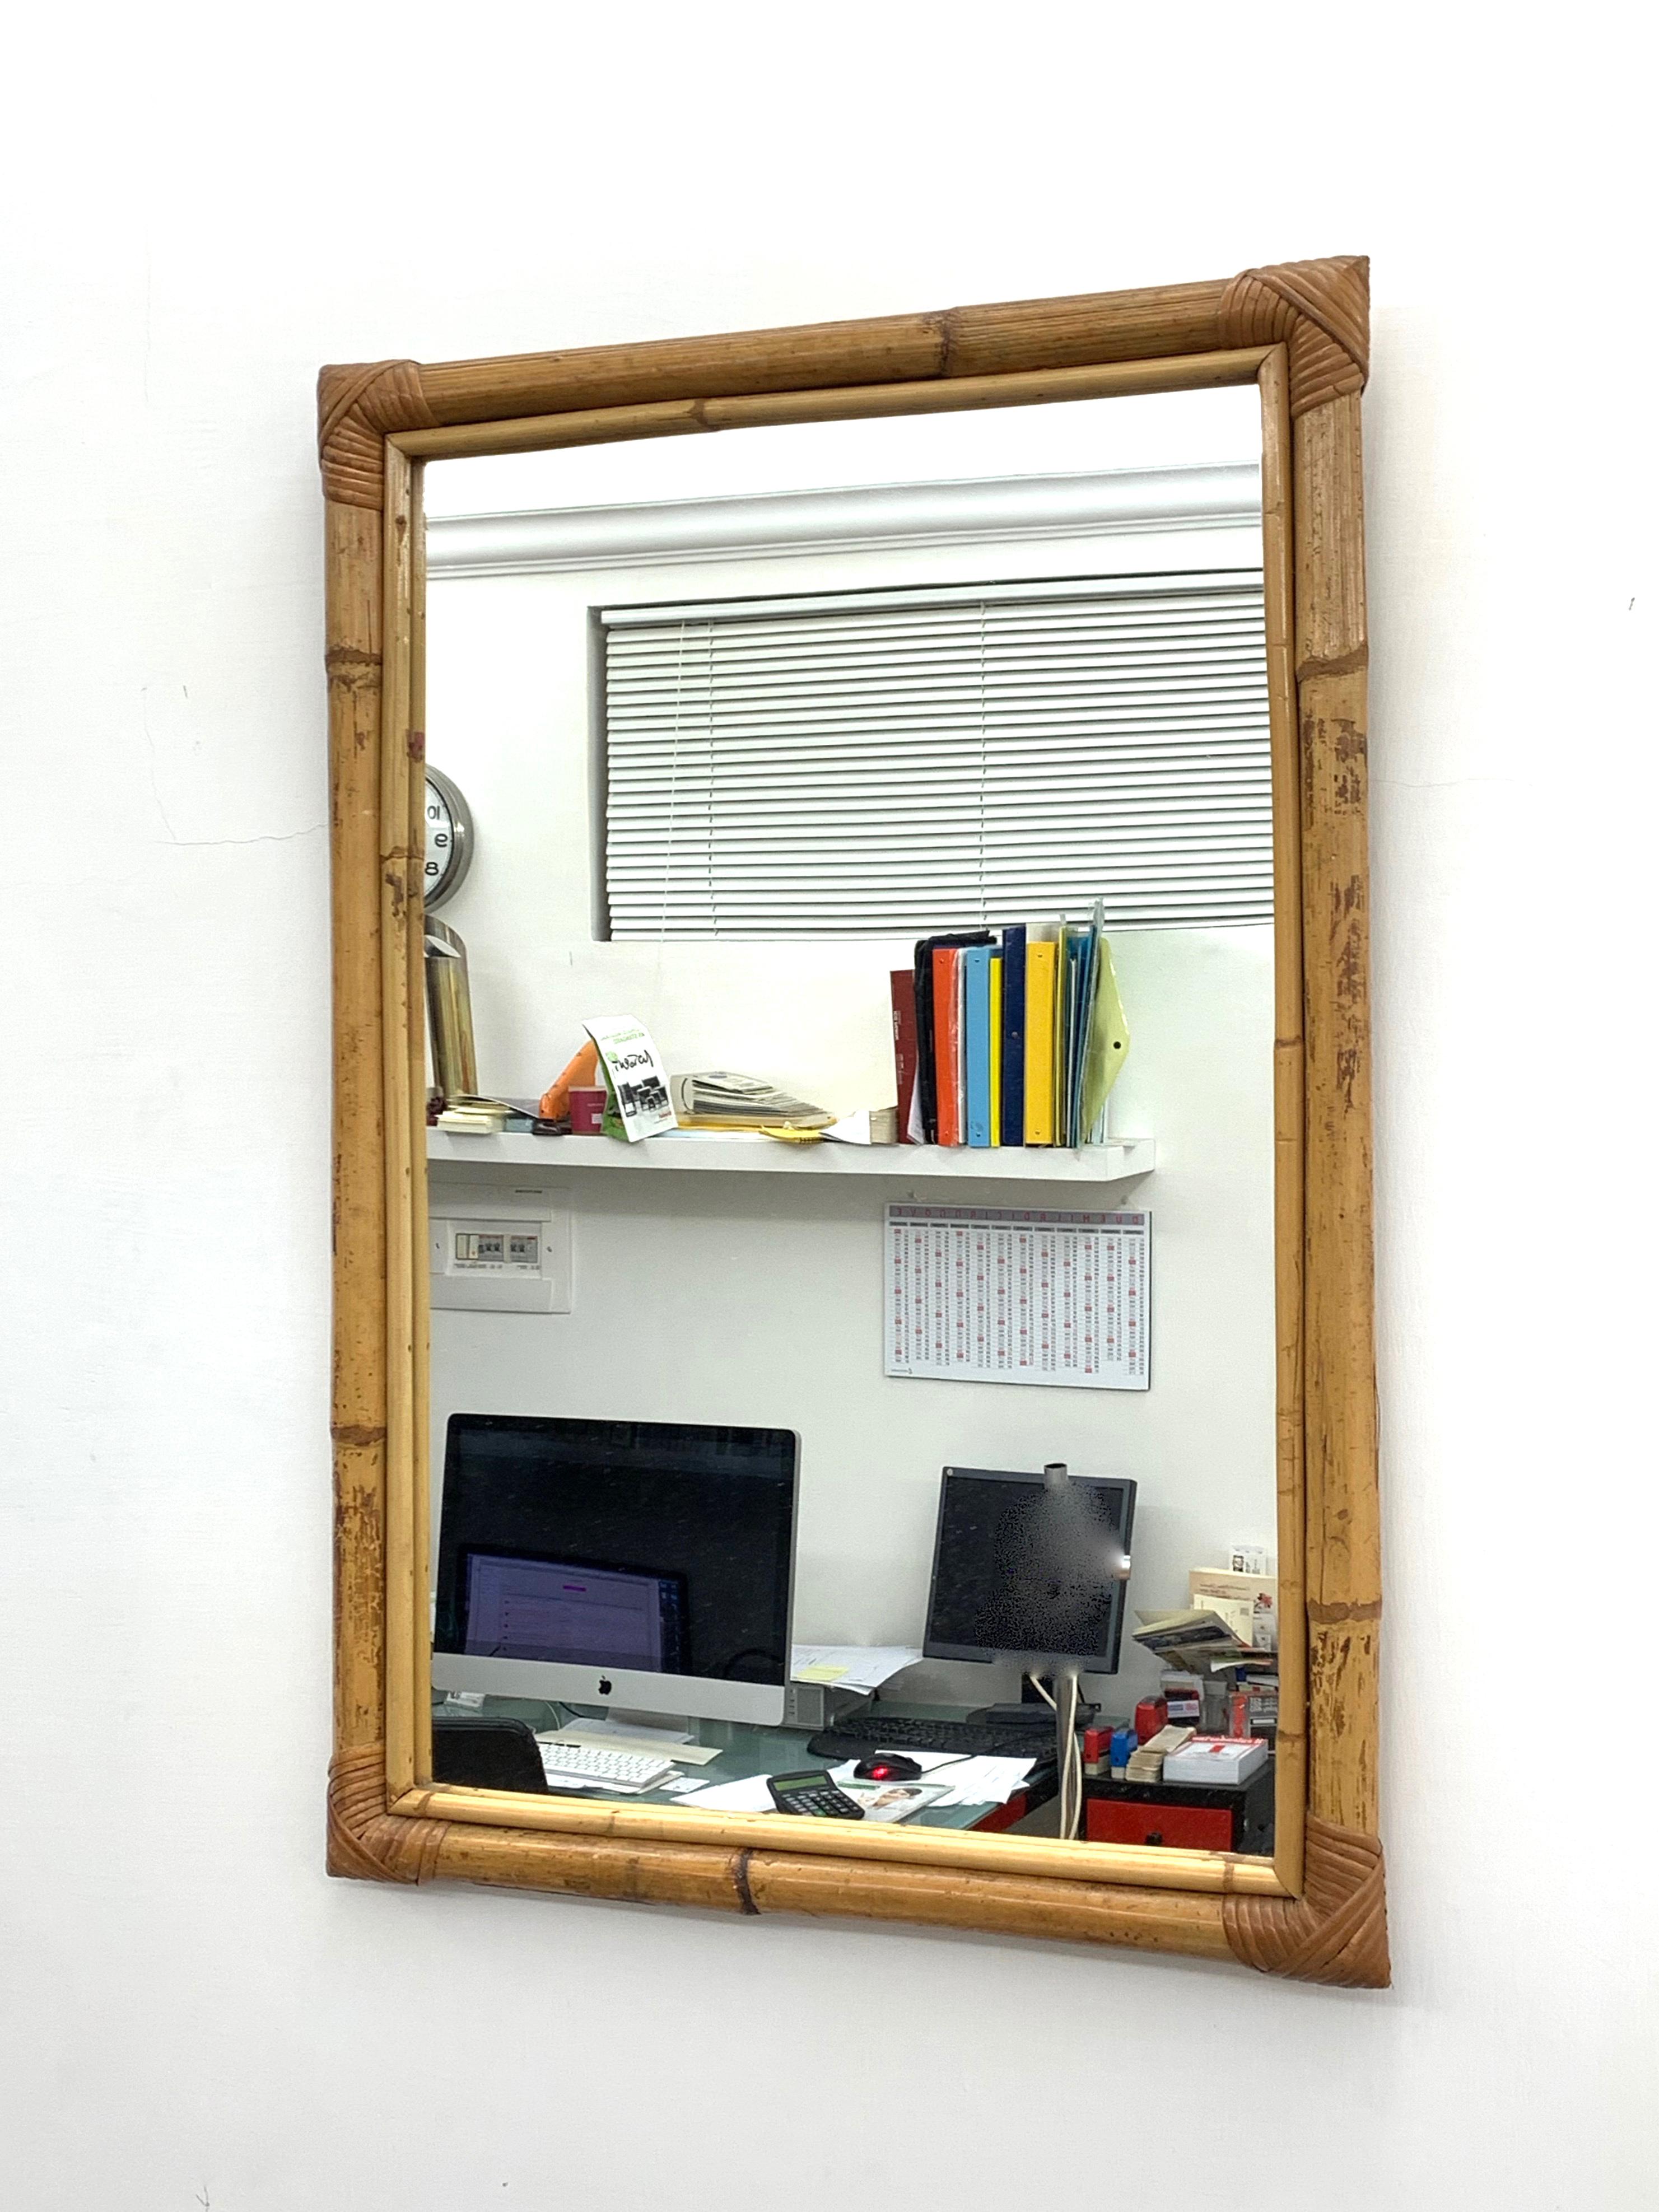 20th Century Rectangular Mirror with Bamboo Wicker Woven Frame from the 1970s, Italy